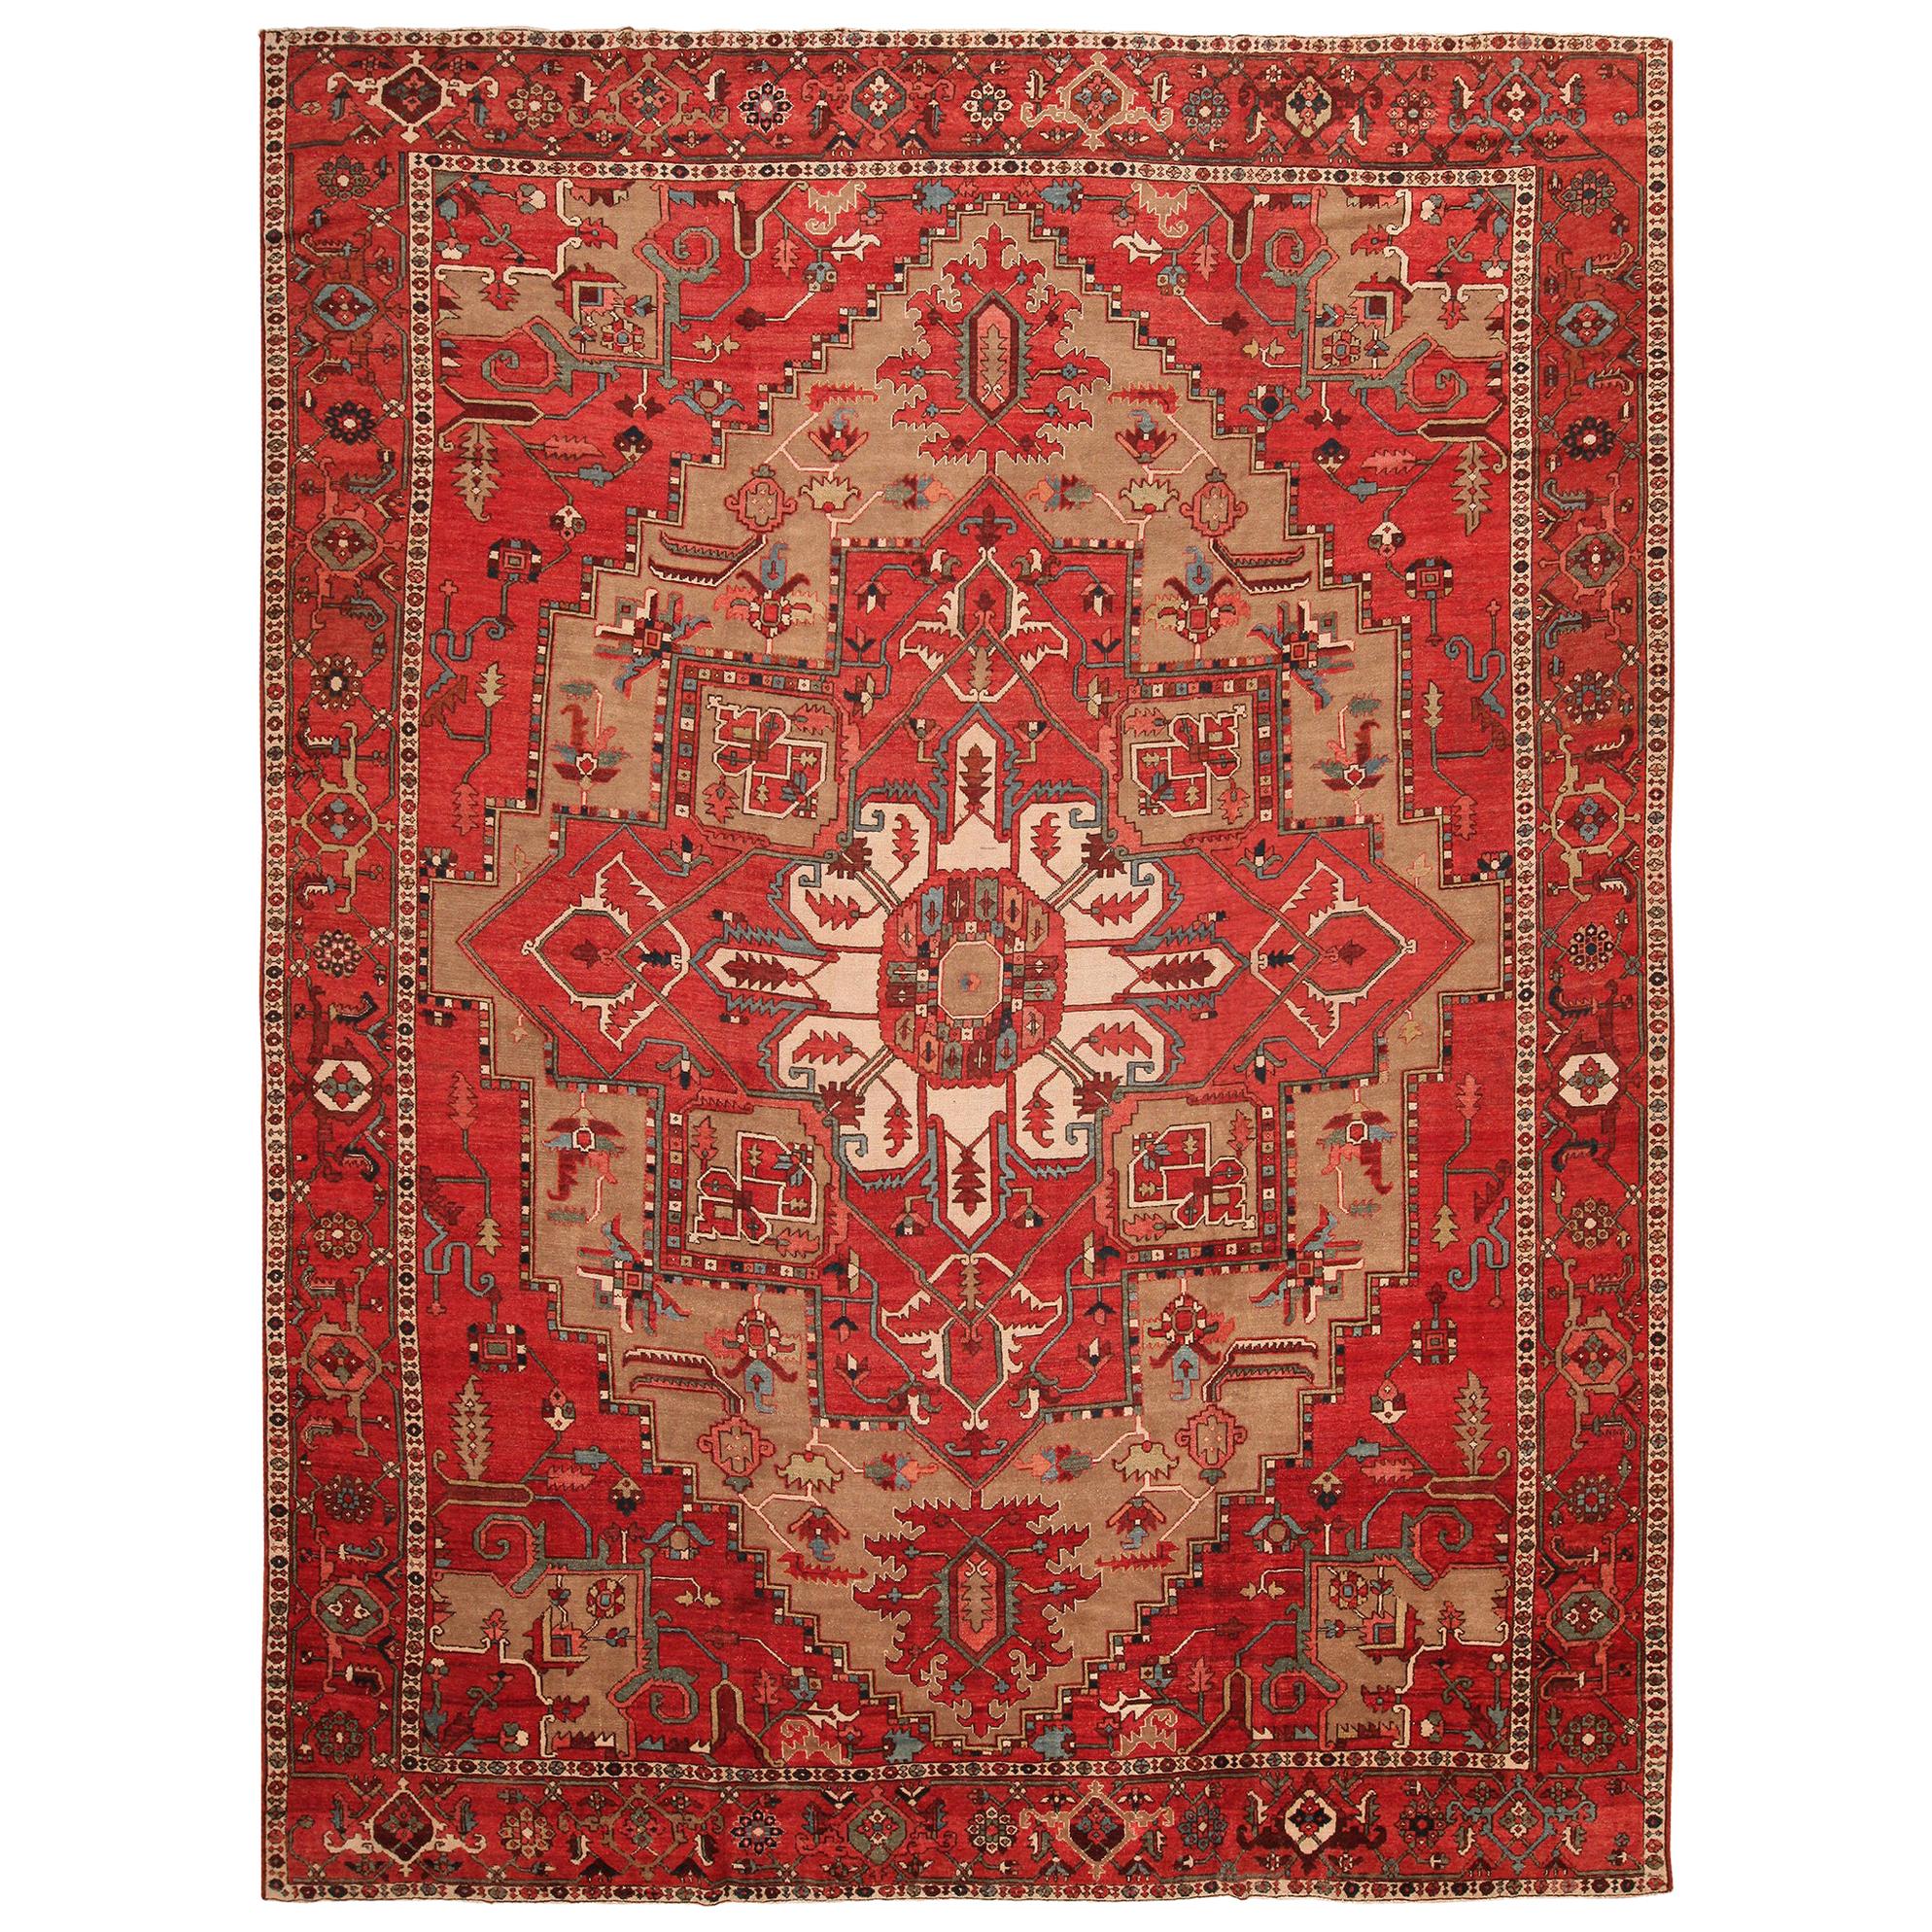 Antique Persian Serapi Rug. Size: 11 ft 6 in x 15 ft For Sale